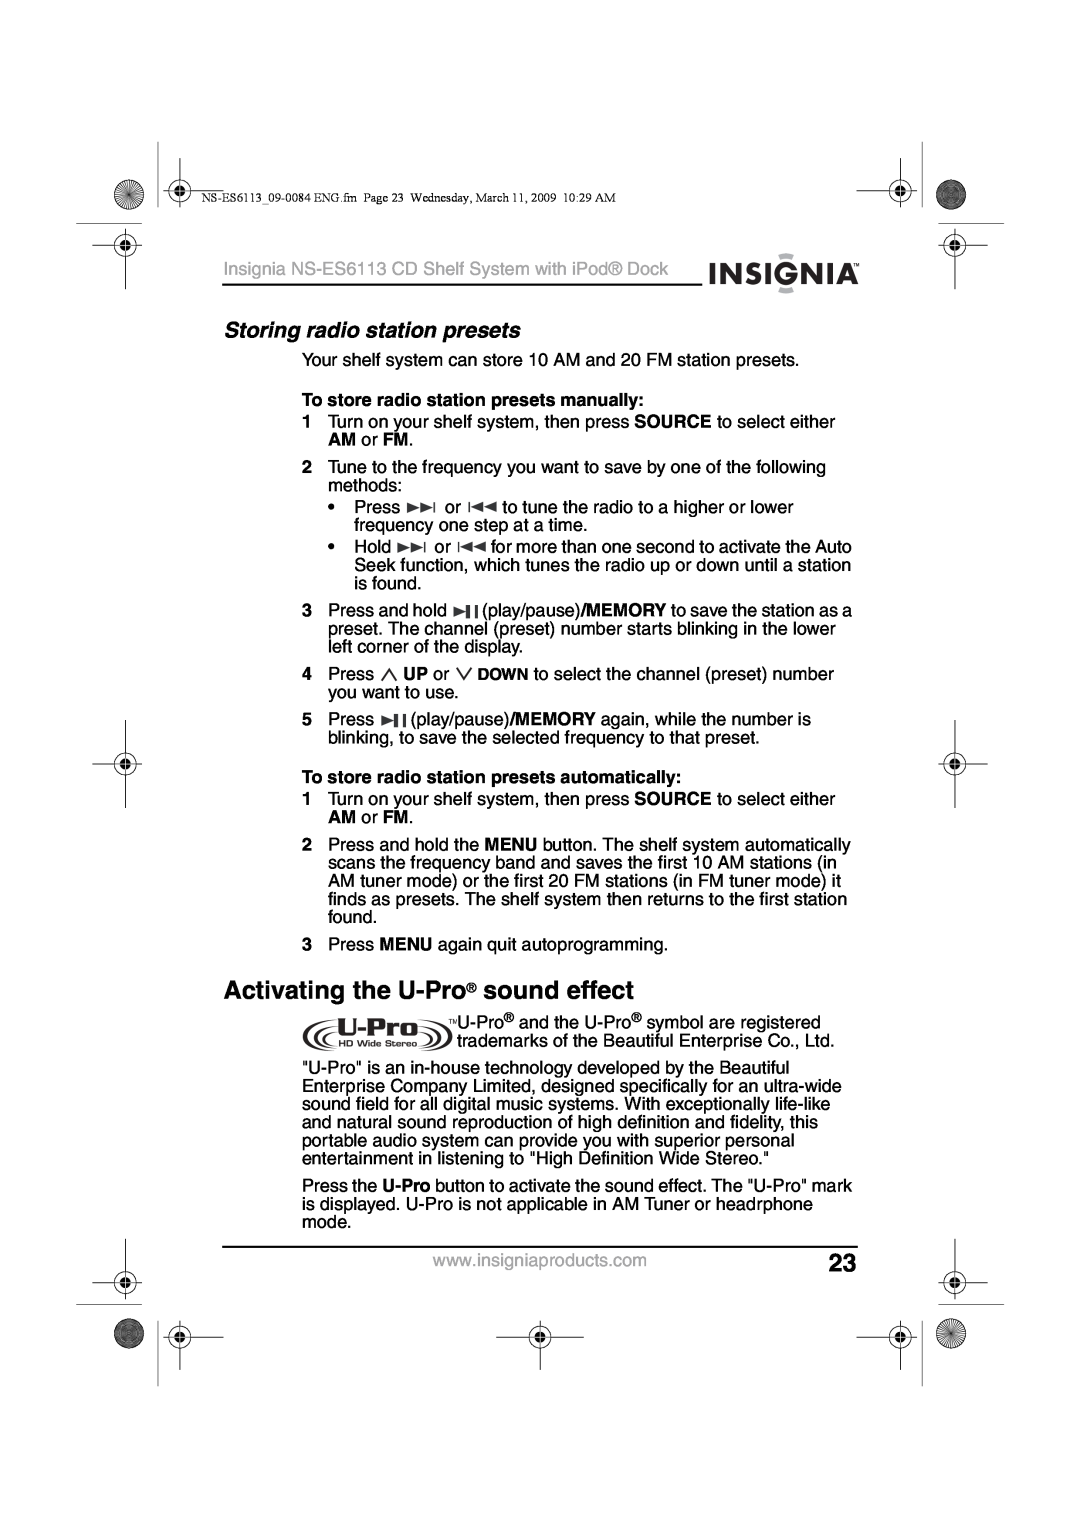 Insignia NS-ES6113 manual Activating the U-Pro sound effect, Storing radio station presets 